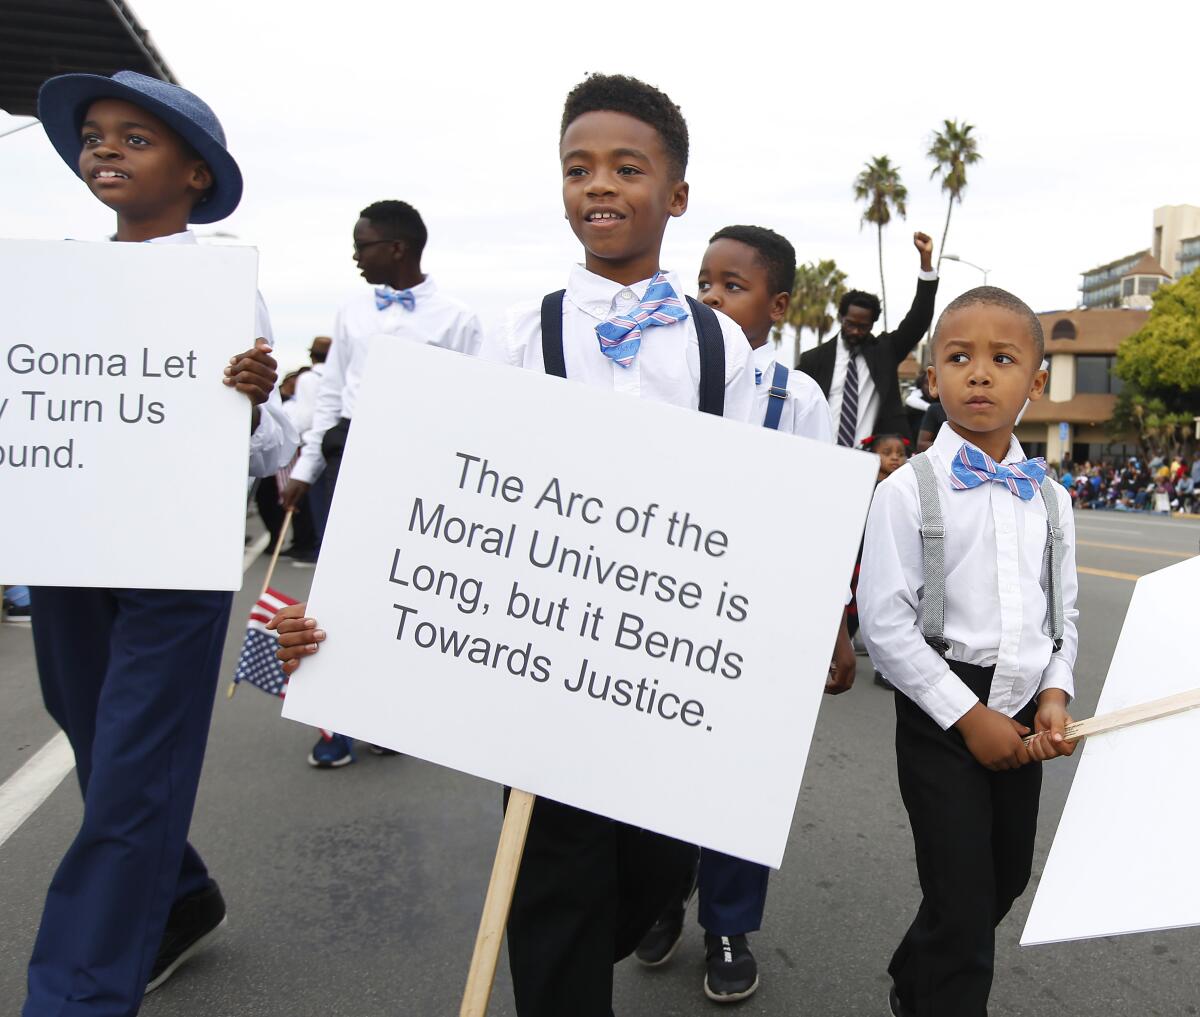 Children from Jack and Jill of America, Inc., San Diego Chapter, walk down Harbor Blvd during the 40th Annual Martin Luther King Jr. Day Parade on Jan. 19, 2020.